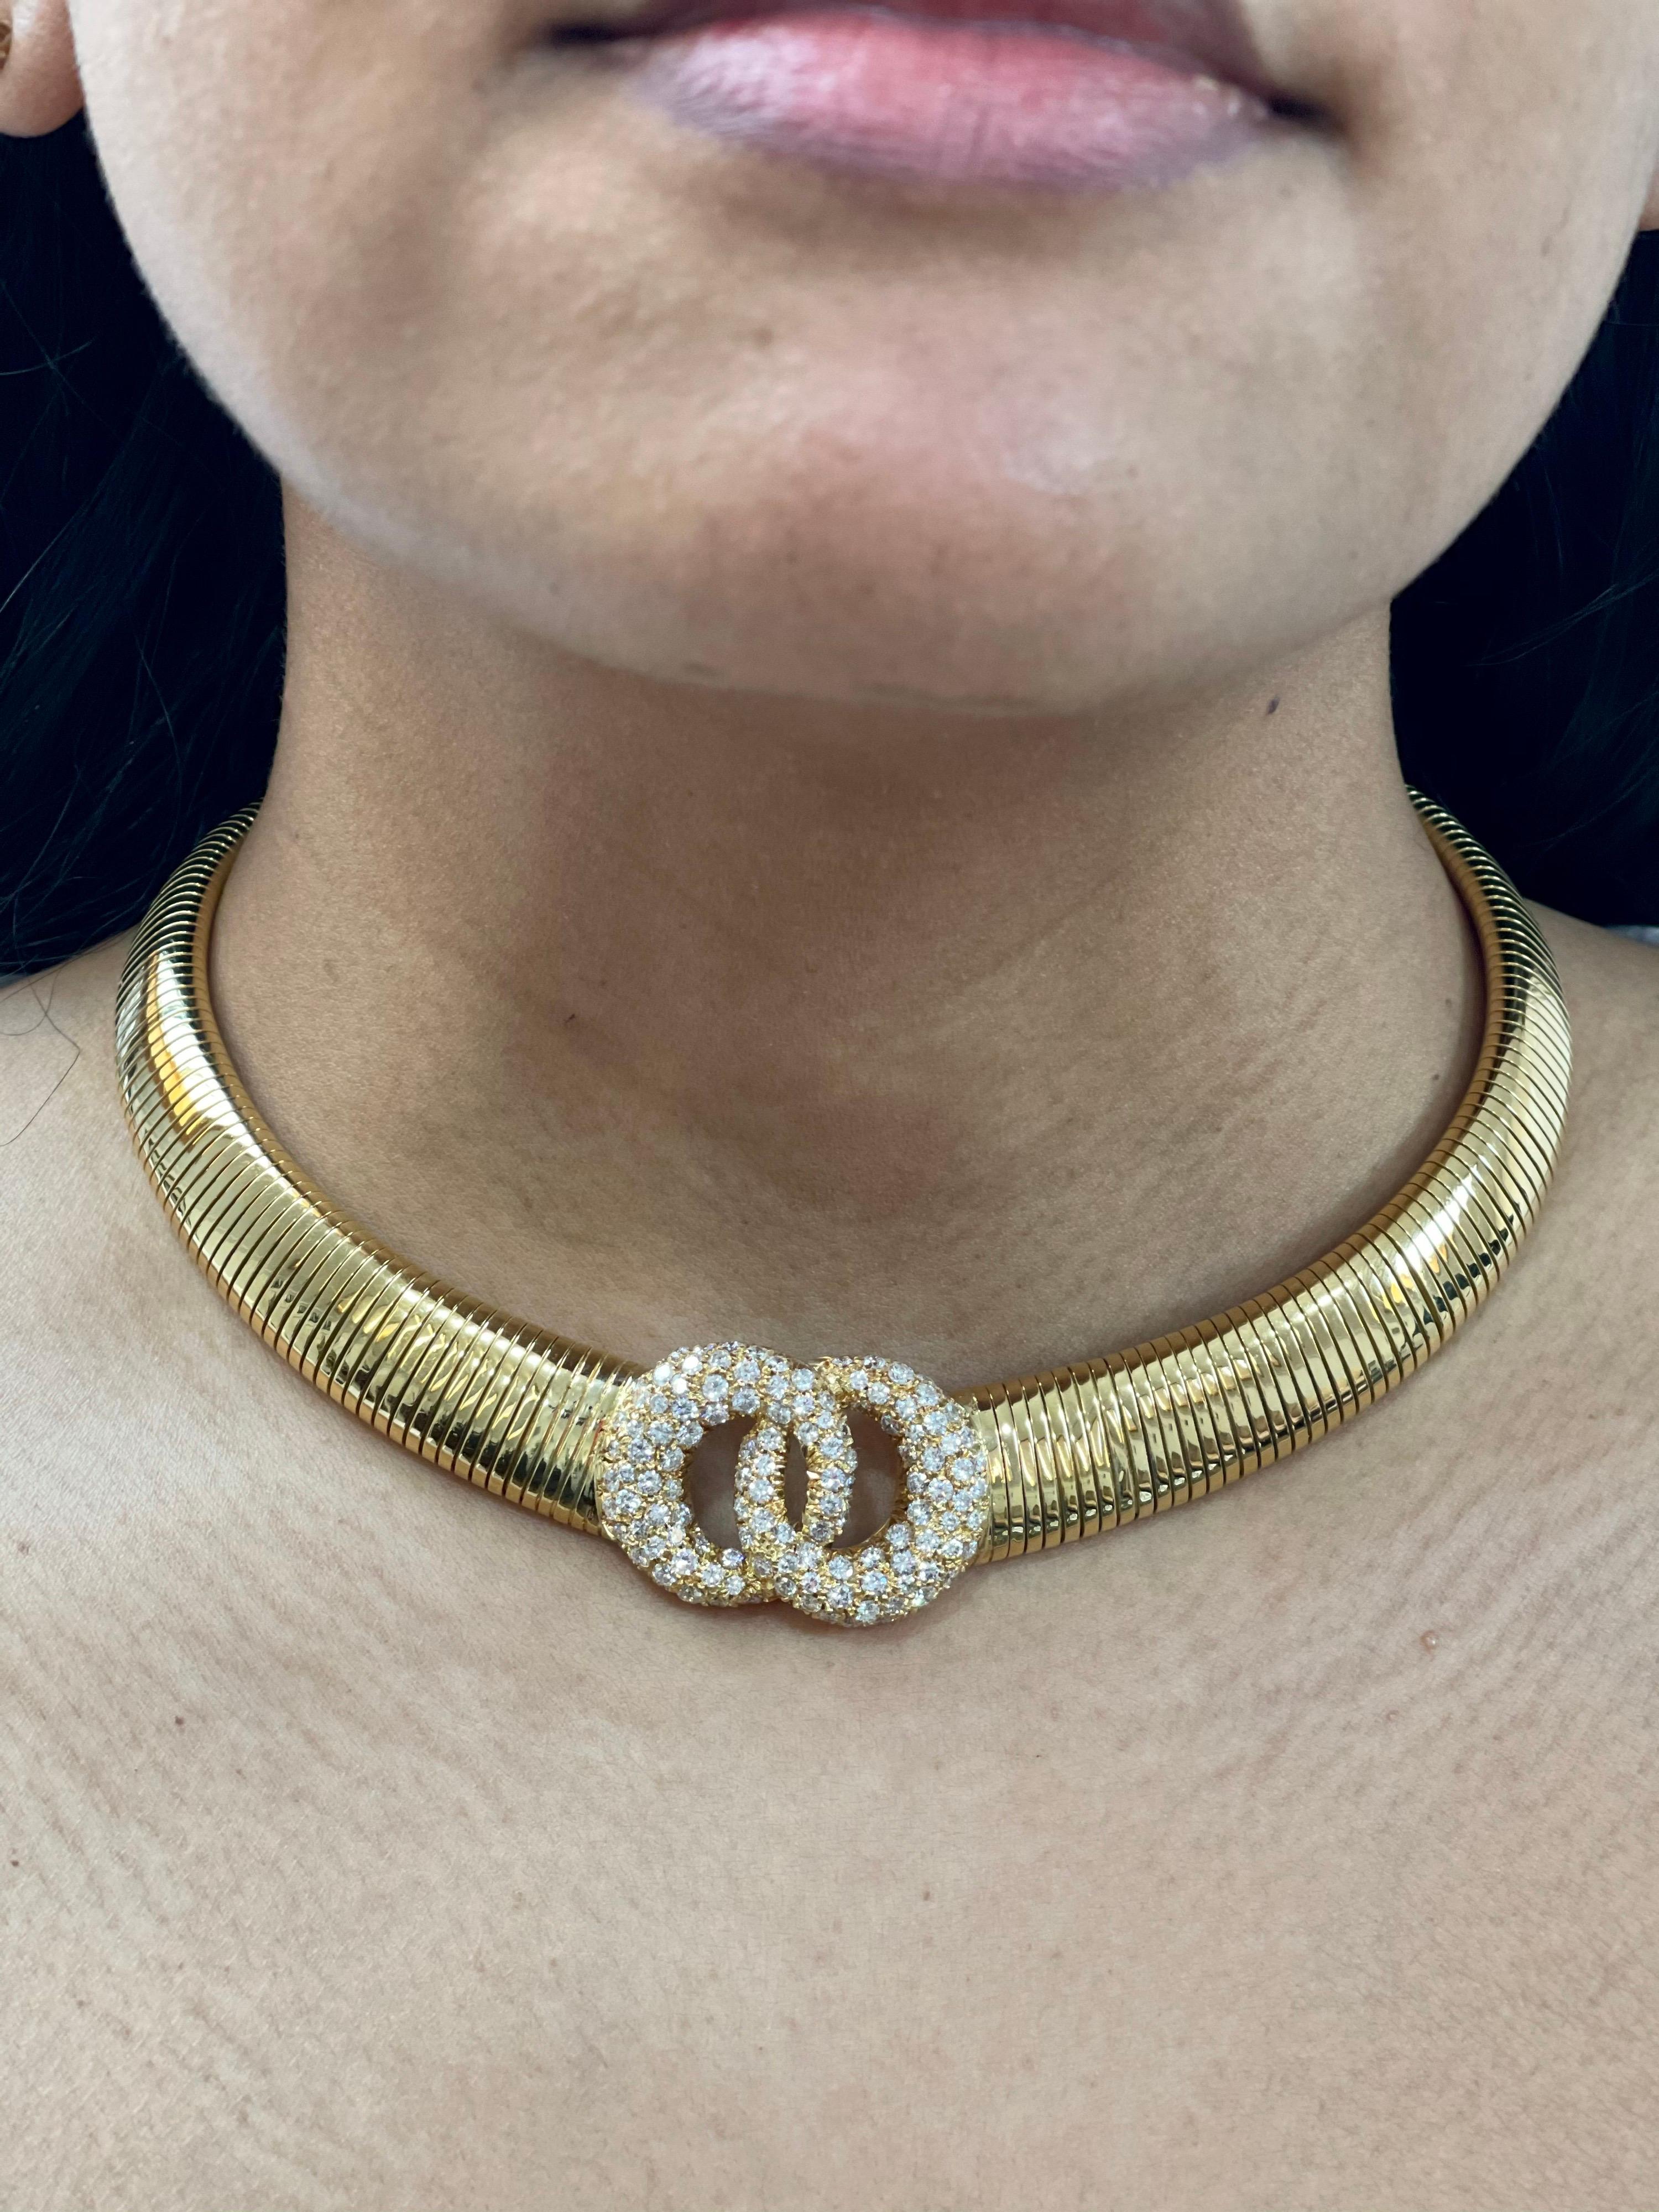 Van Cleef & Arpels 18 Carat Yellow Gold and 6 Ct Diamond Collar/Choker Necklace In Excellent Condition For Sale In New York, NY